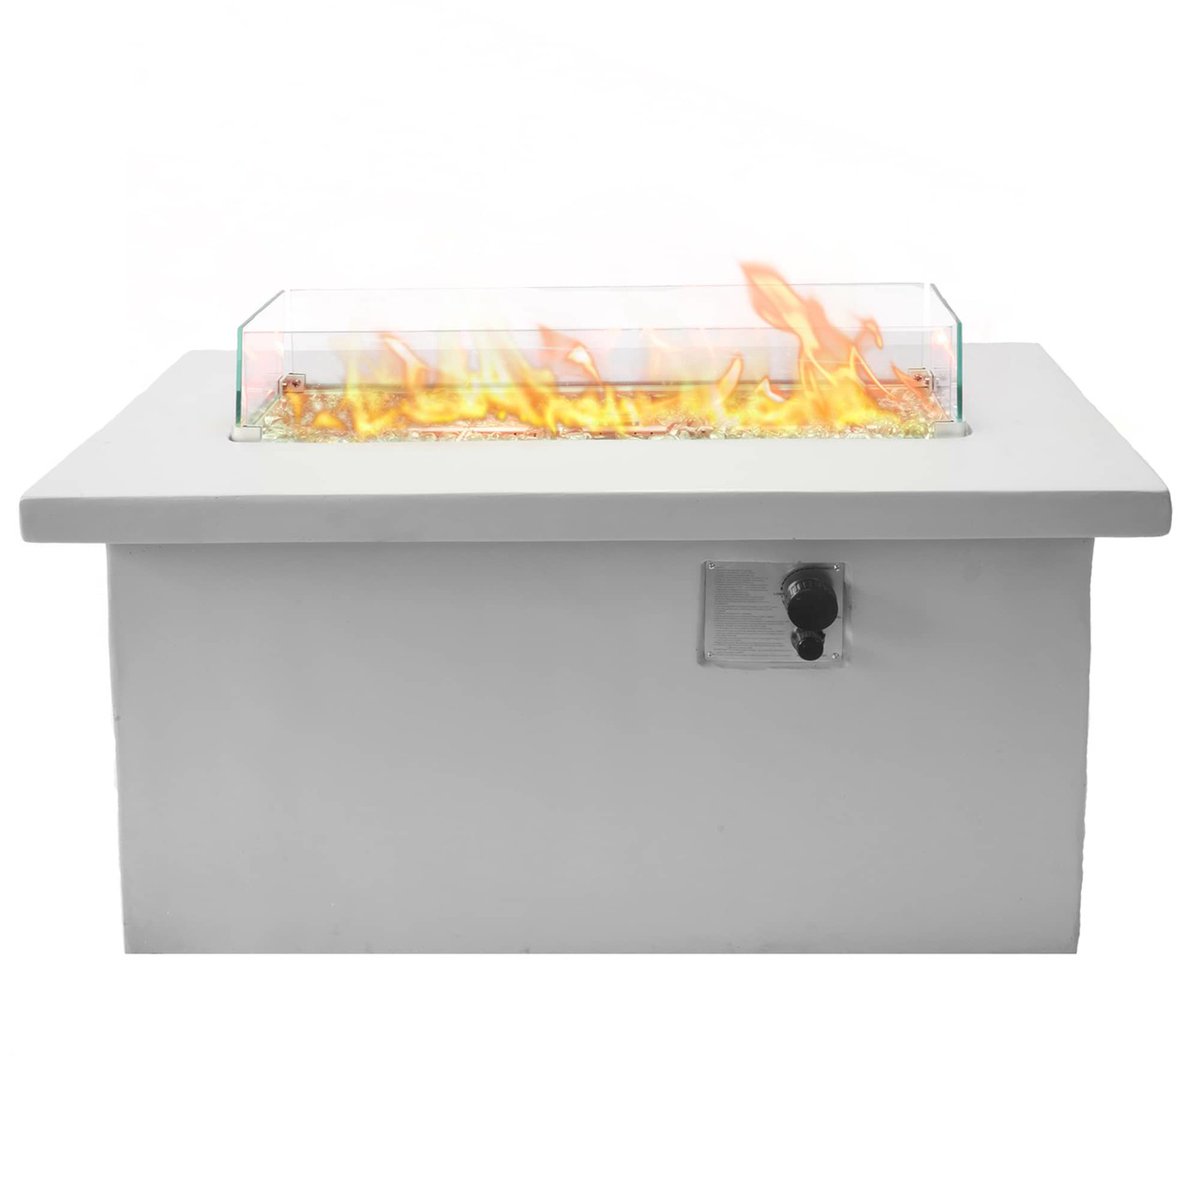 With the weather becoming chilly it is nice to have a fire table near by! Have you seen our new fire tables!? 👀 Browse by clicking below.👇 🔥:bit.ly/2y79T6K